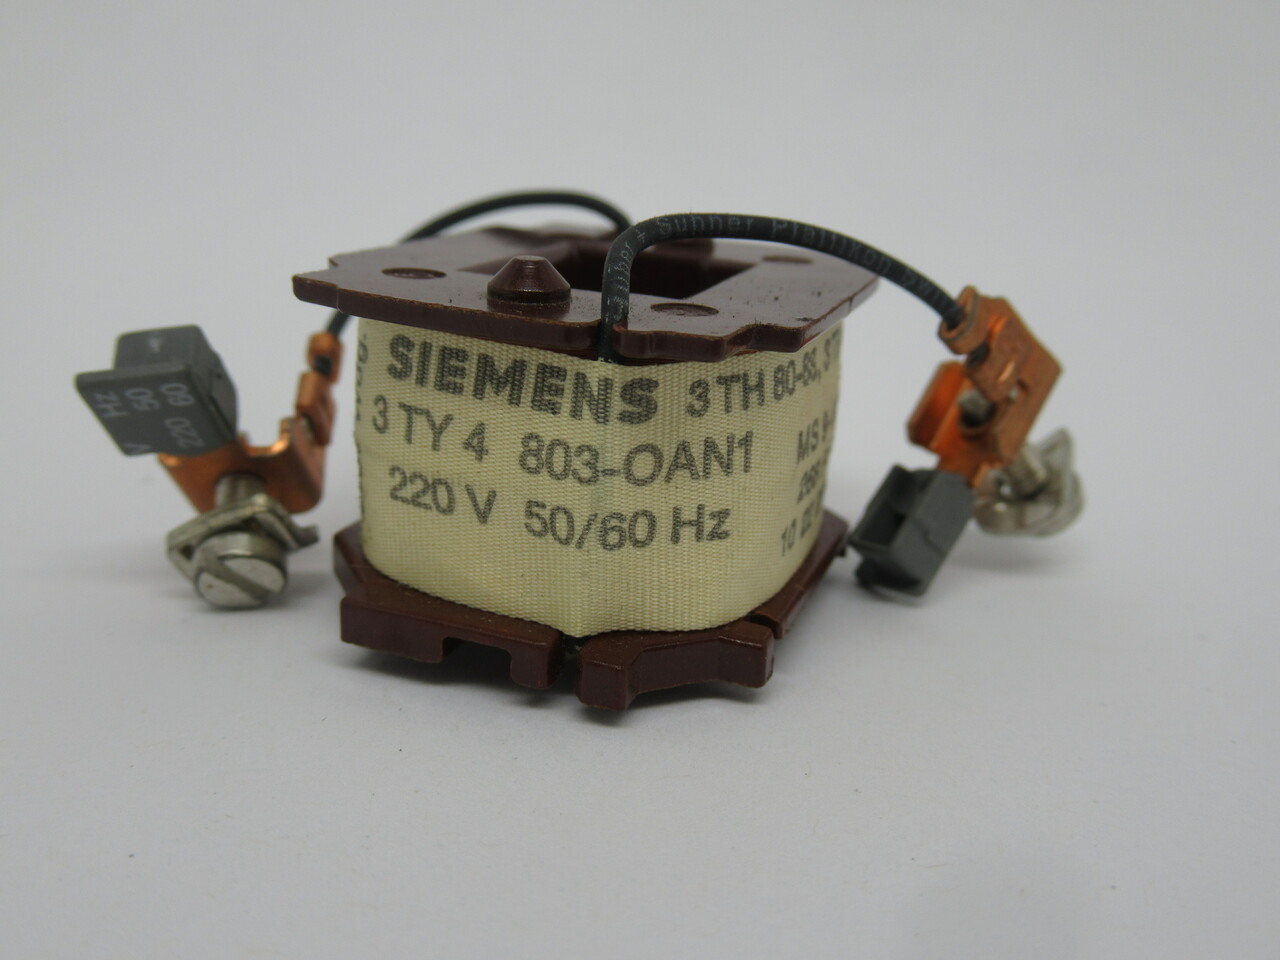 Siemens 3TY4803-0AN1 Magnetic Coil Brown 220V 50/60Hz USED